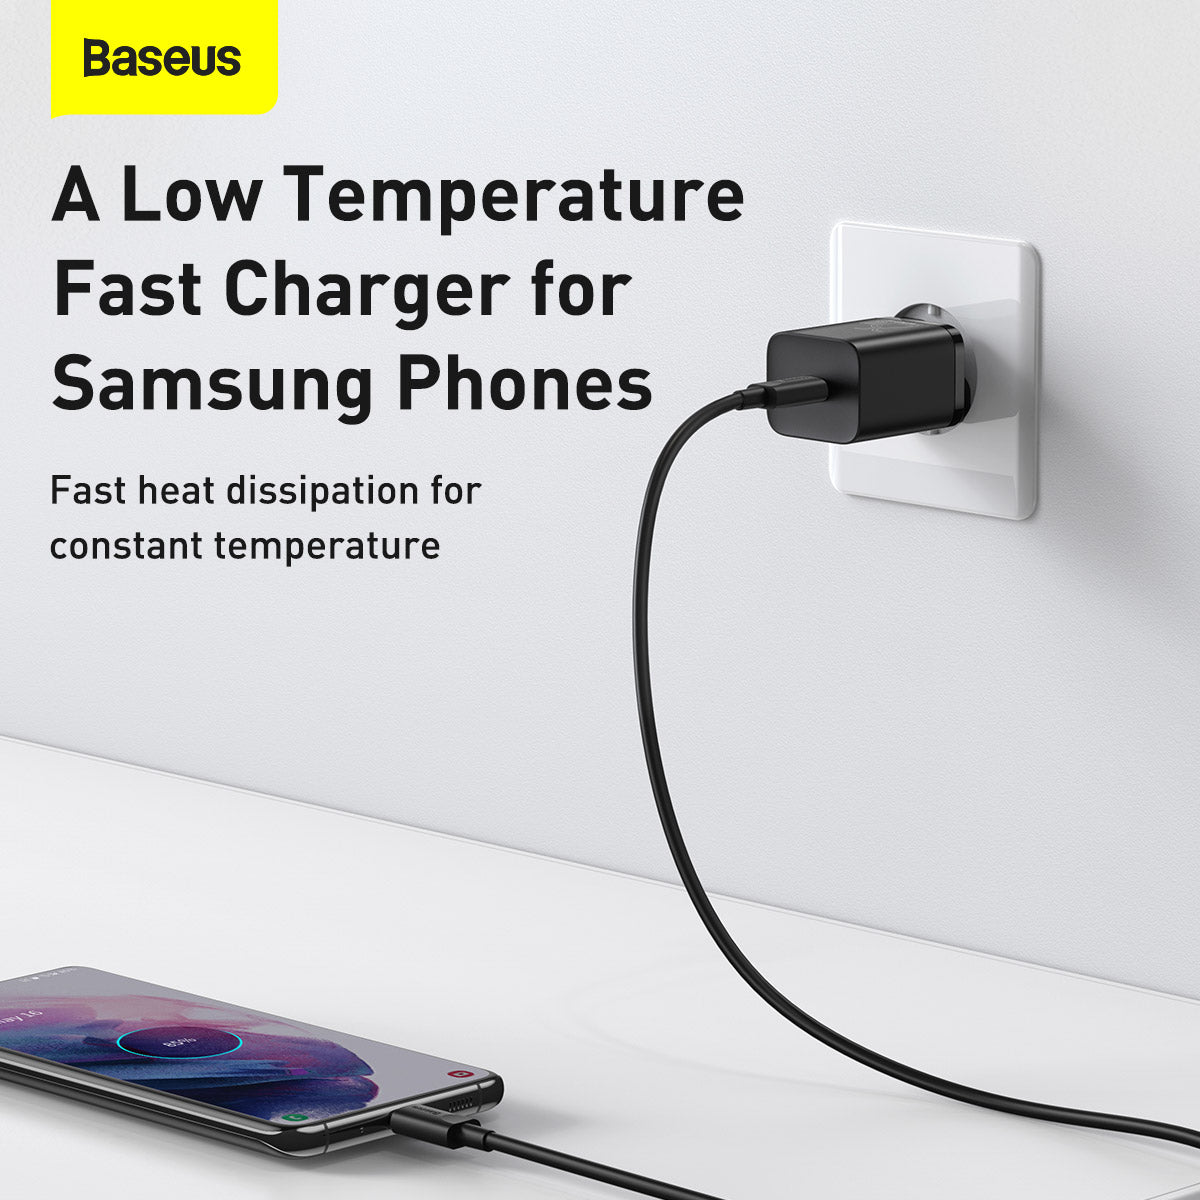 Baseus Super Si 25W Quick Charger and 1M Type C to Type C Cable - Black